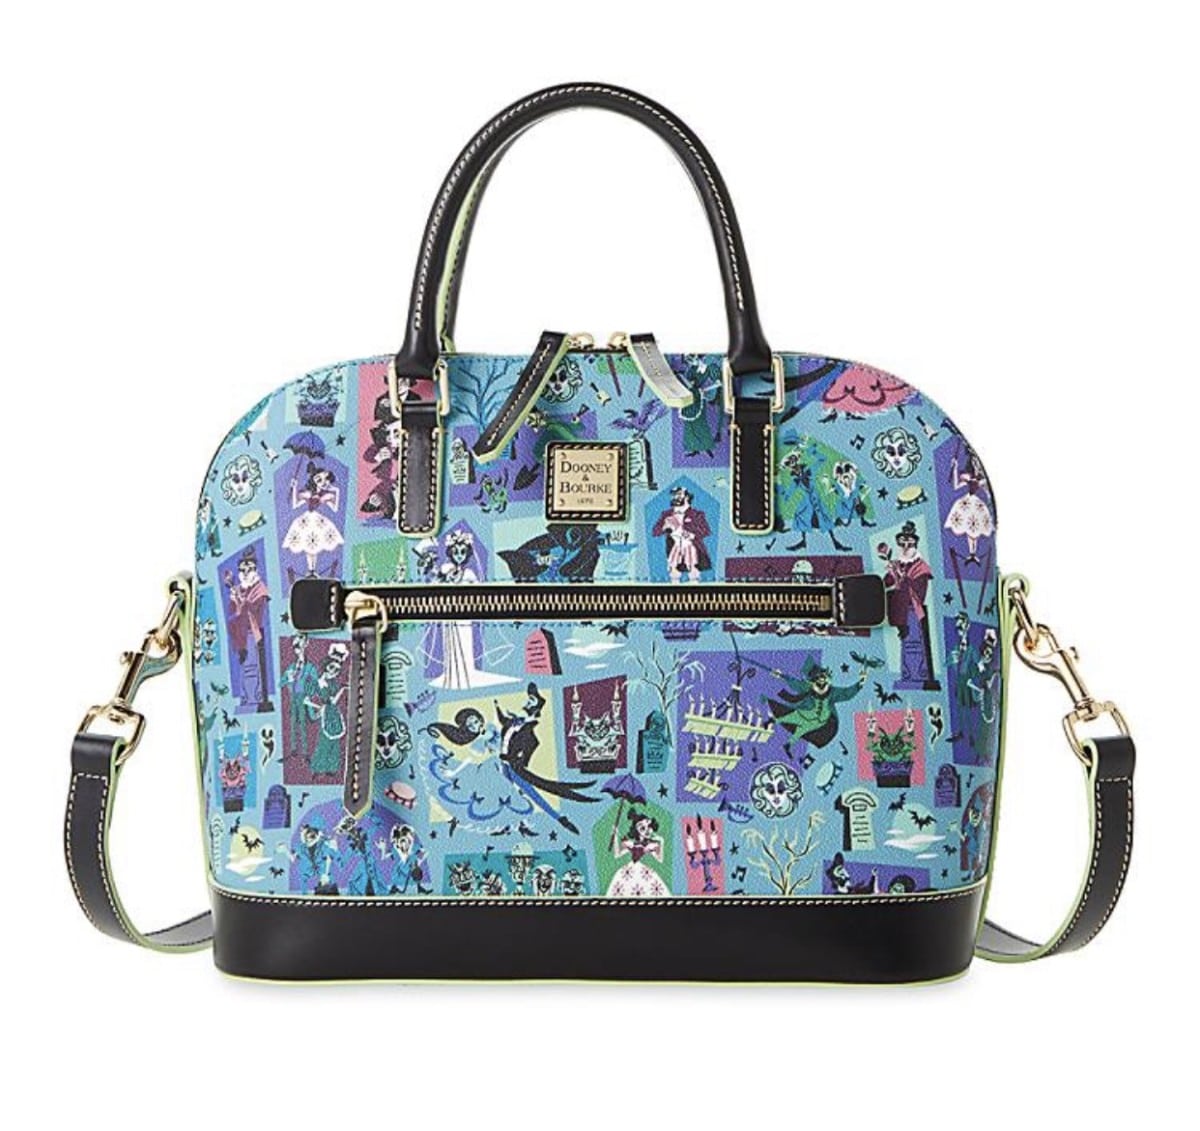 NEW! The Haunted Mansion by Dooney & Bourke